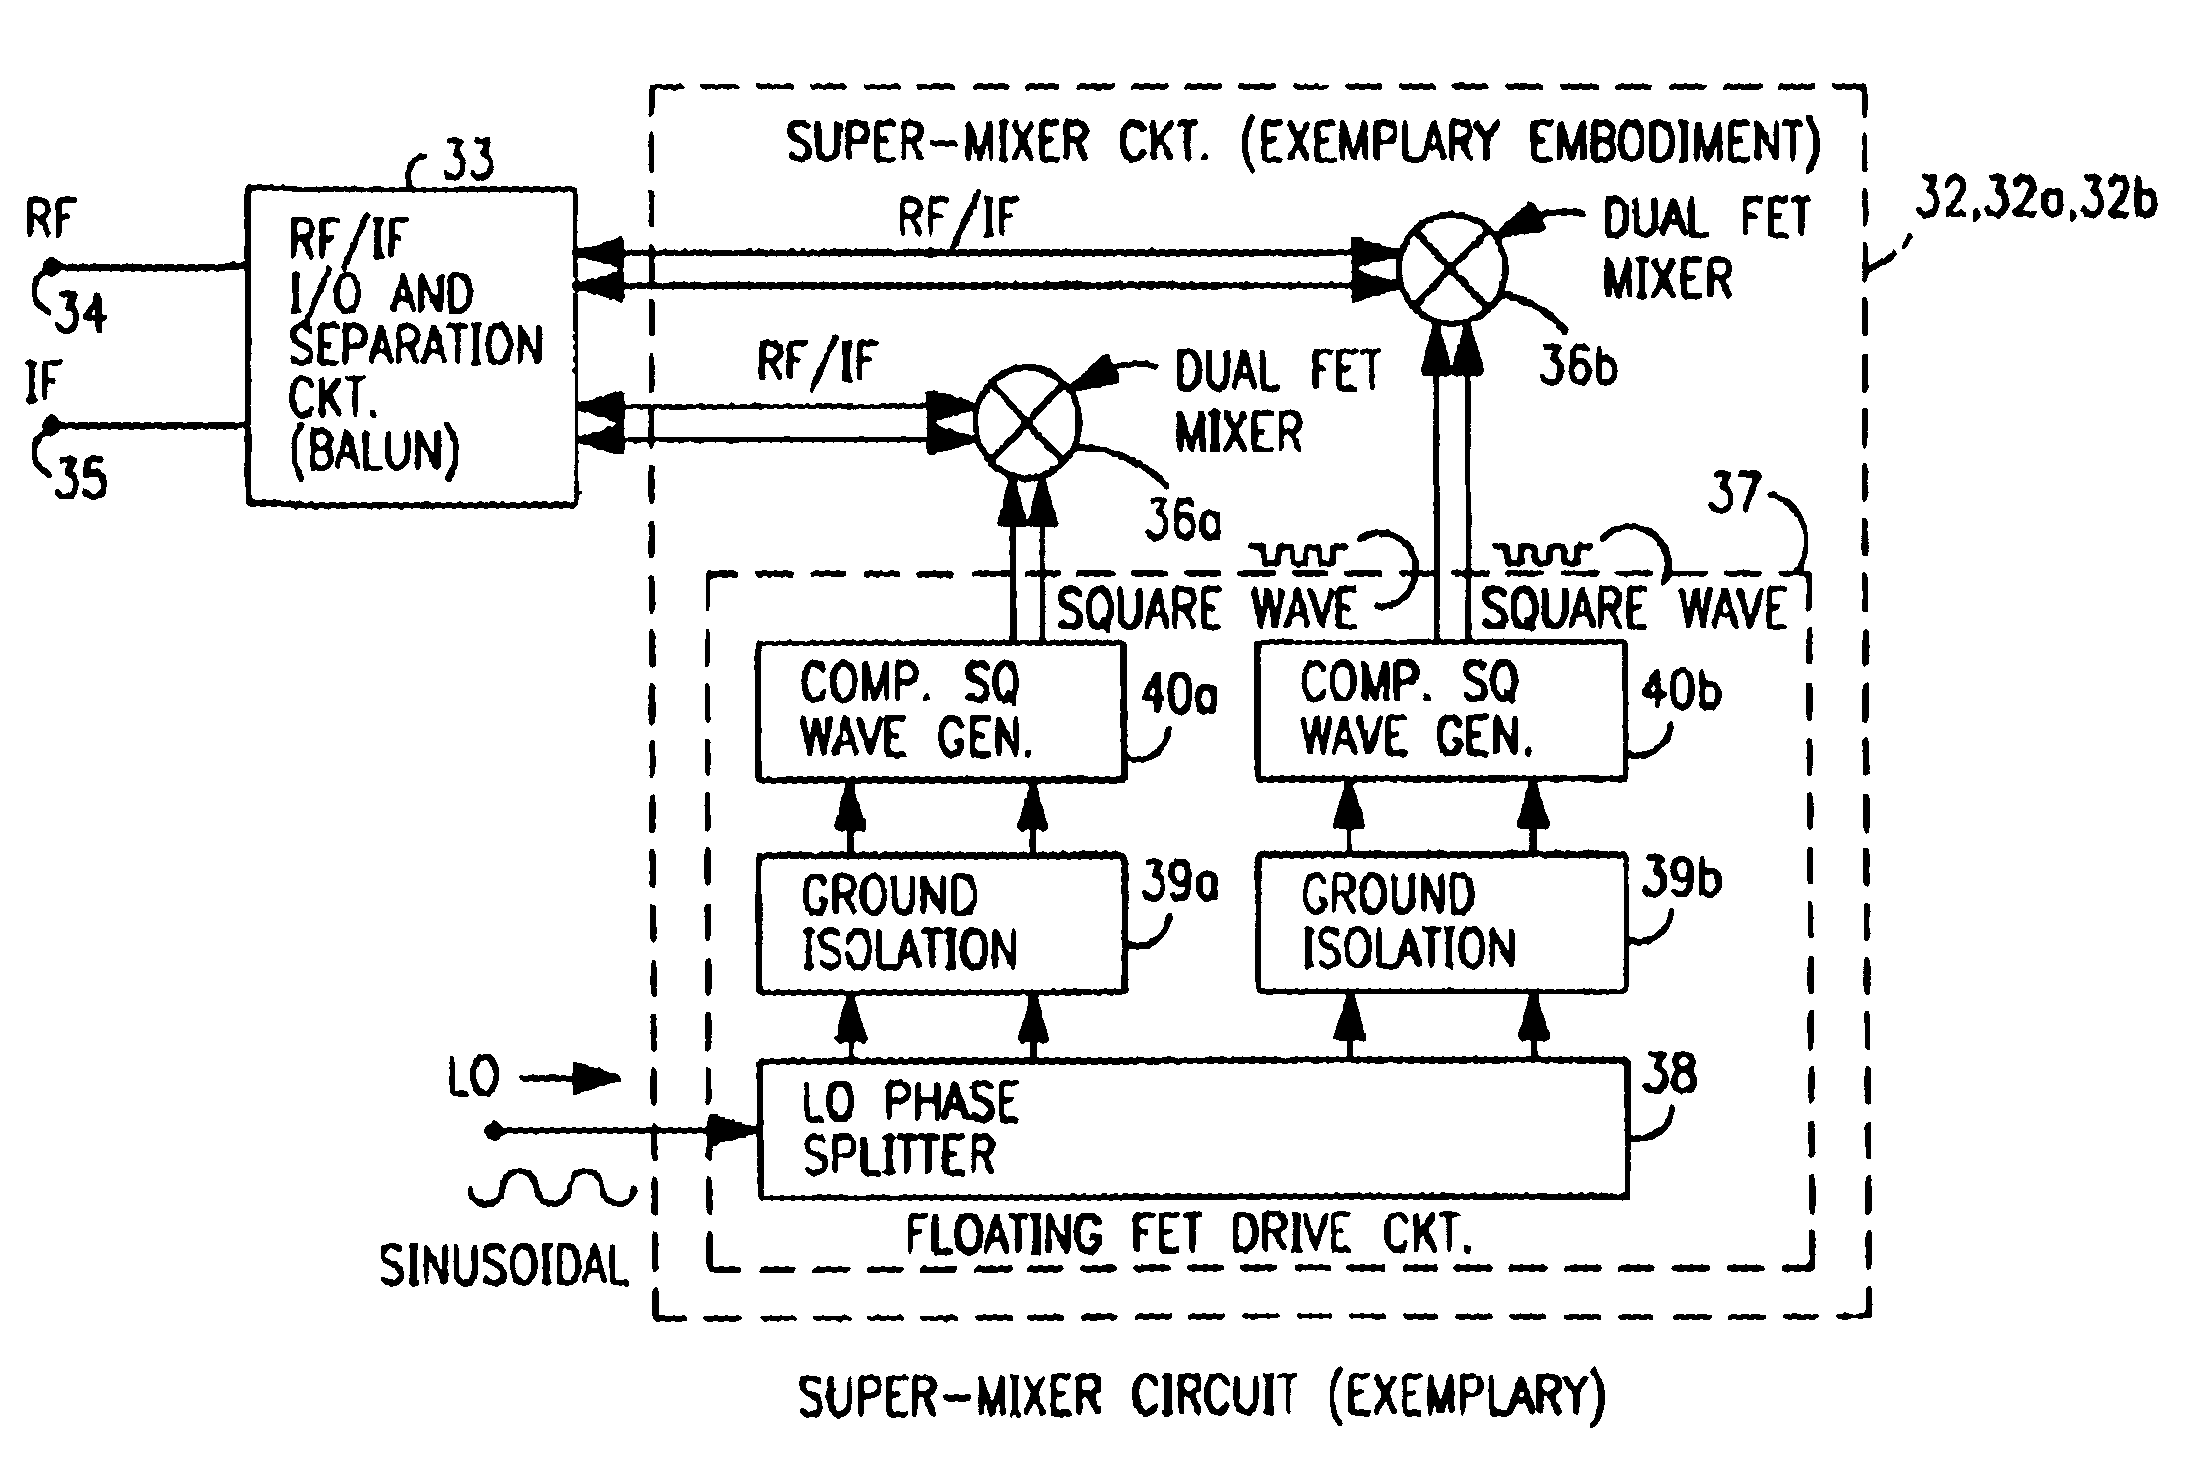 Radio system including mixer device and switching circuit and method having switching signal feedback control for enhanced dynamic range and performance